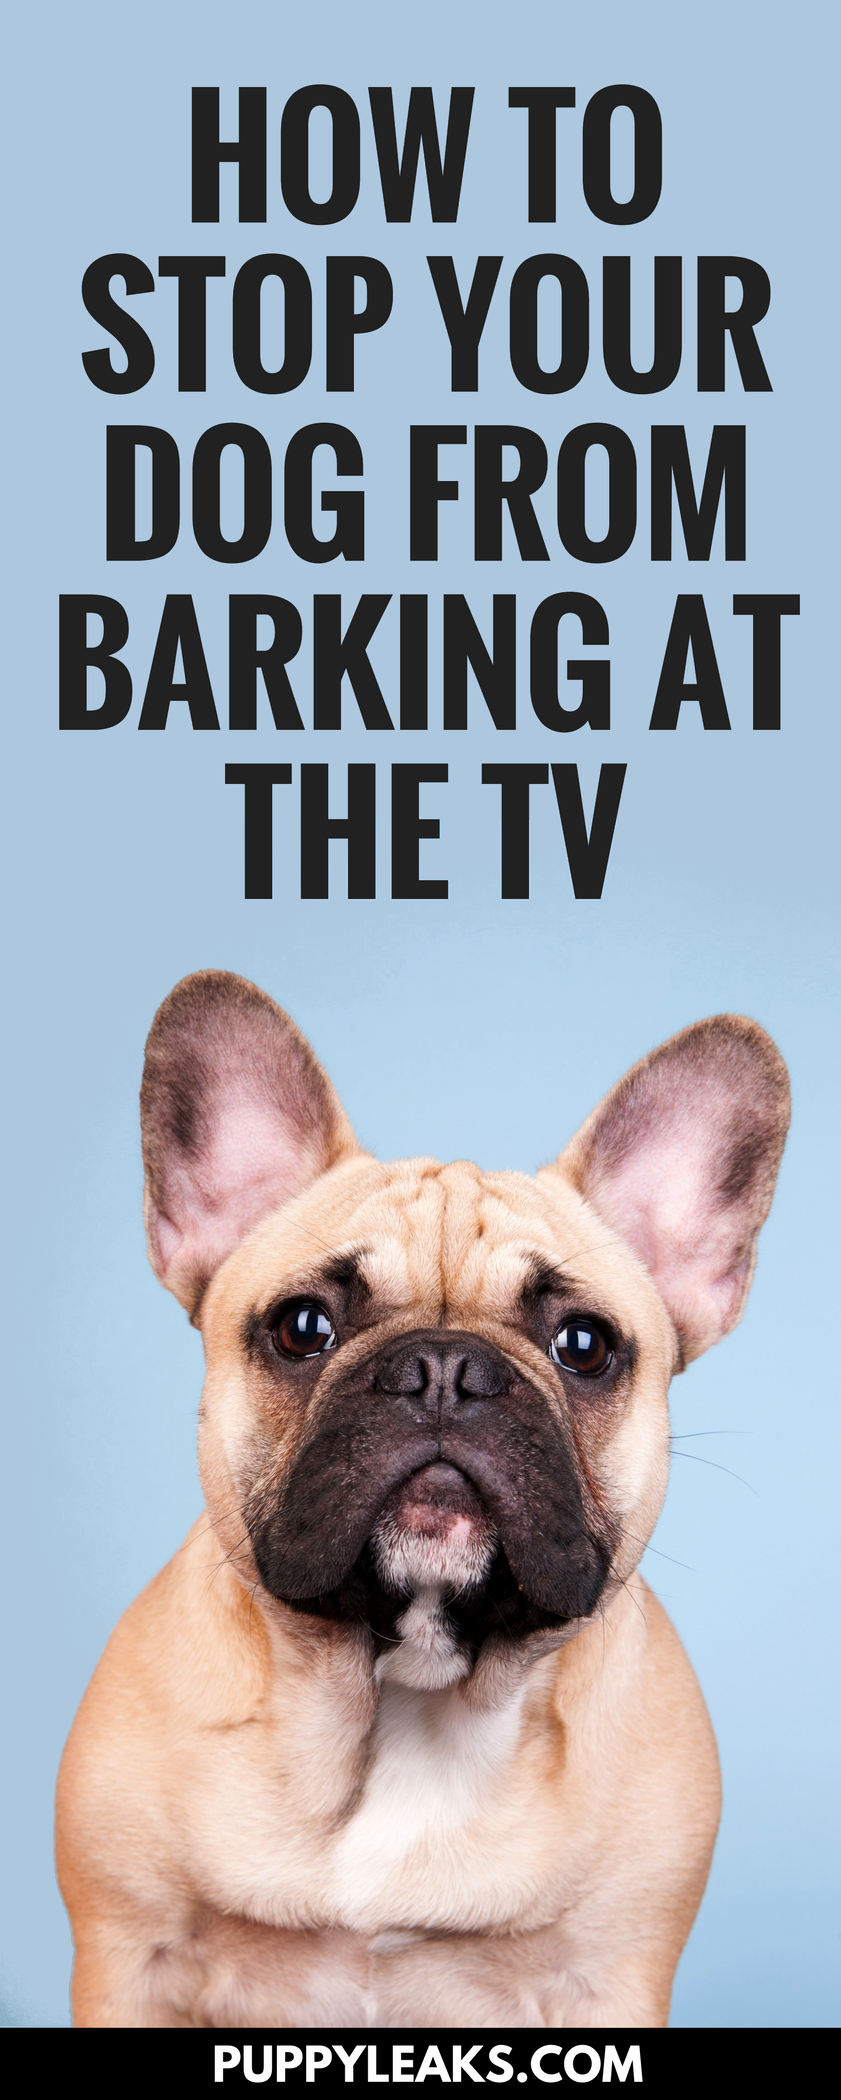 How I Stopped My Dog From Barking at the TV